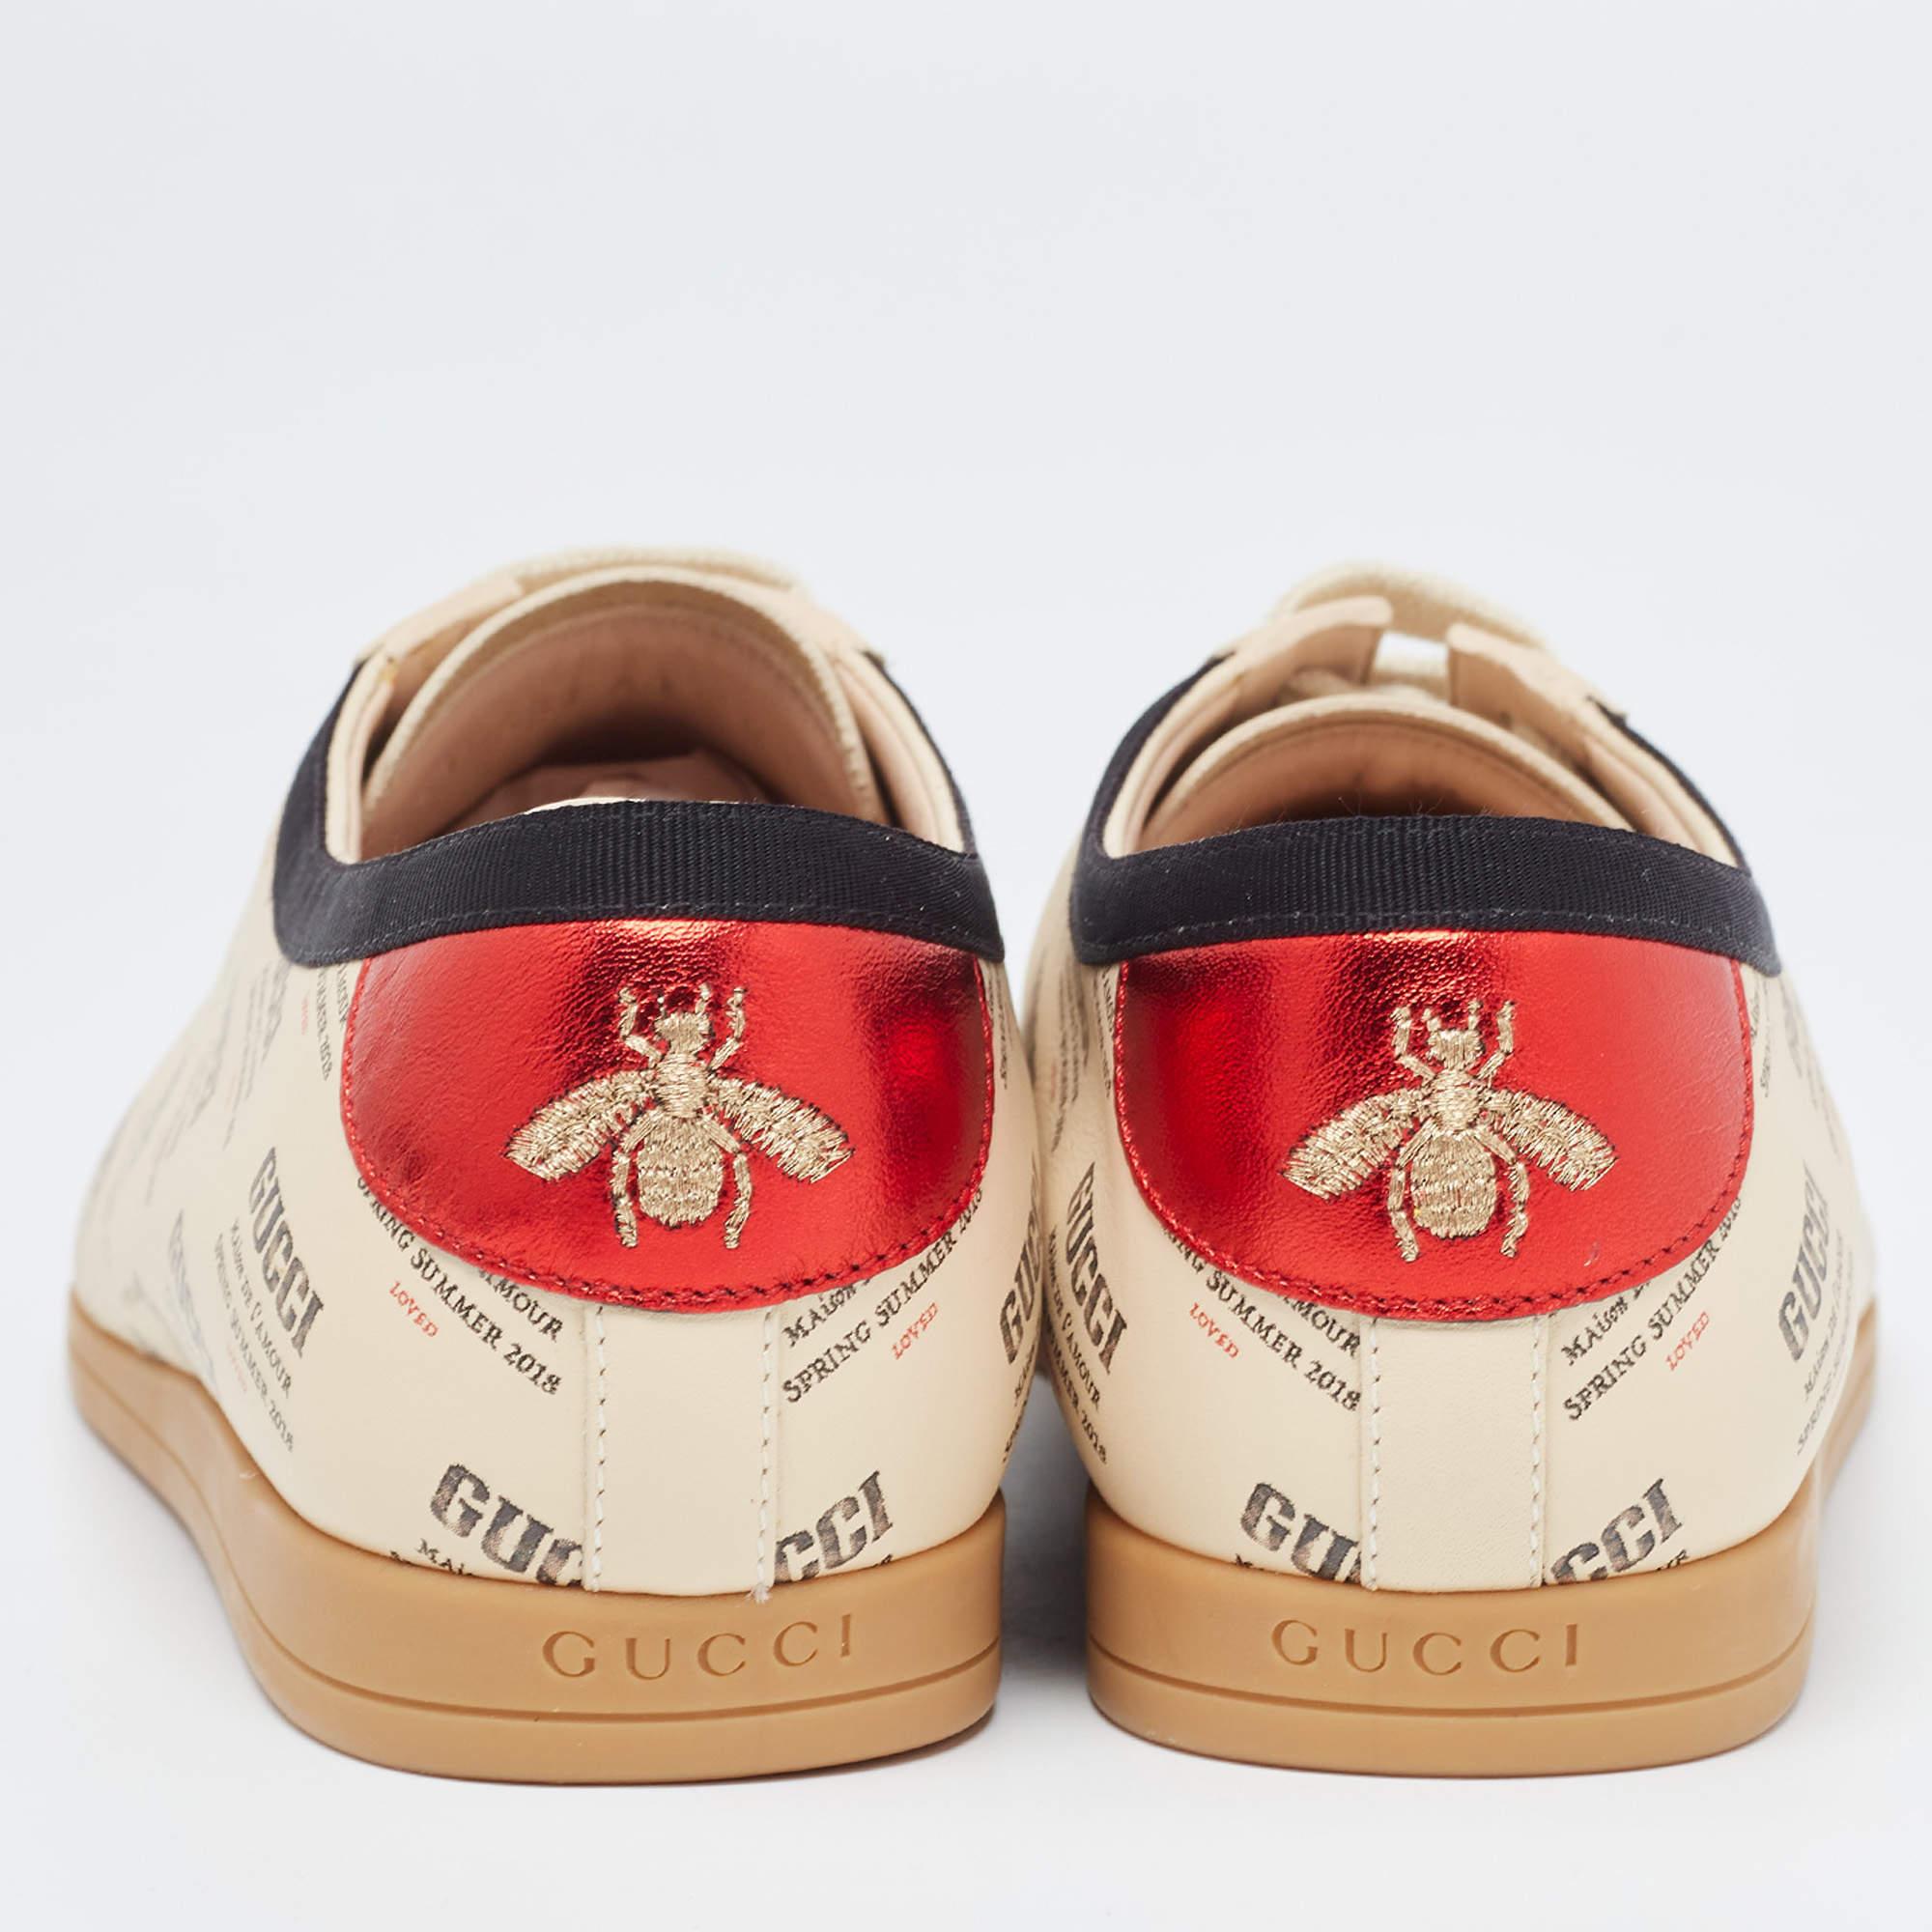 Gucci Beige Invite Print Leather Falacer Sneakers Size 40 For Sale 1